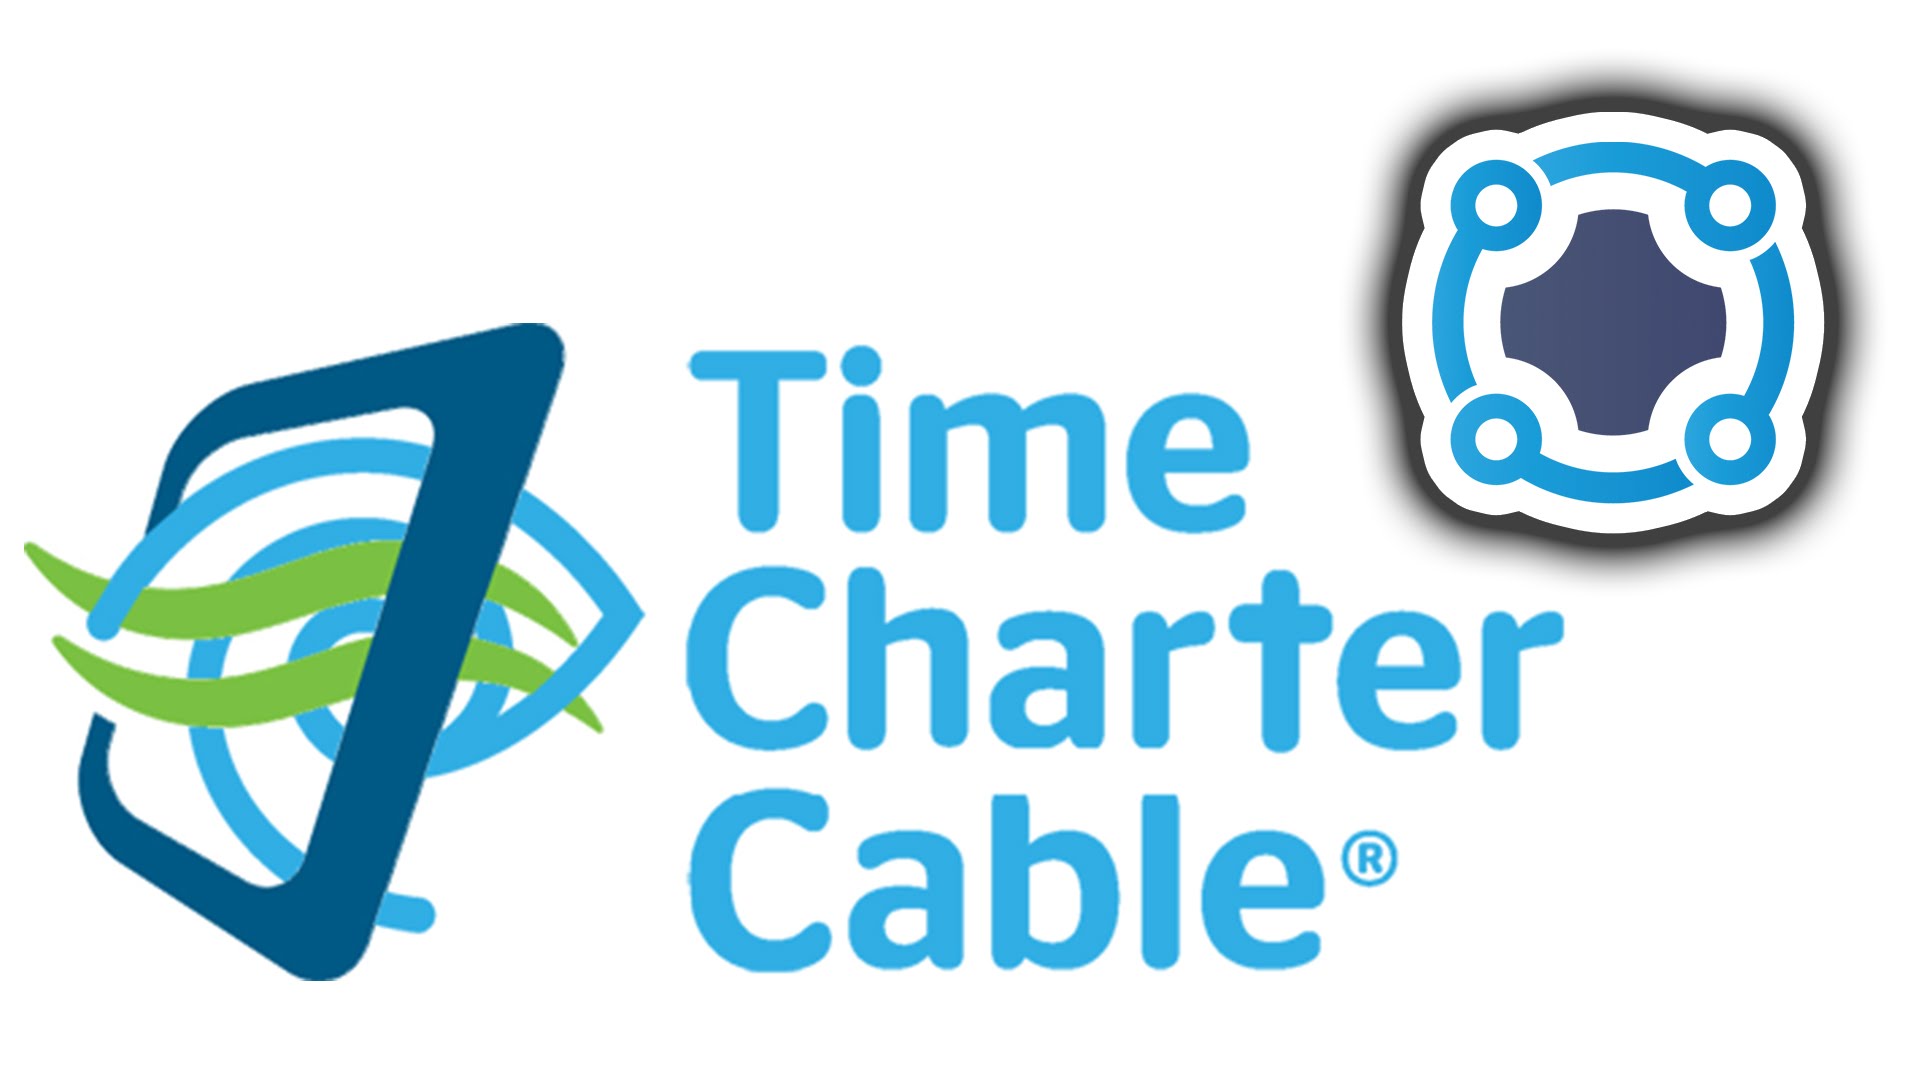 Charter to buy Time Warner Cable for $56 Billion